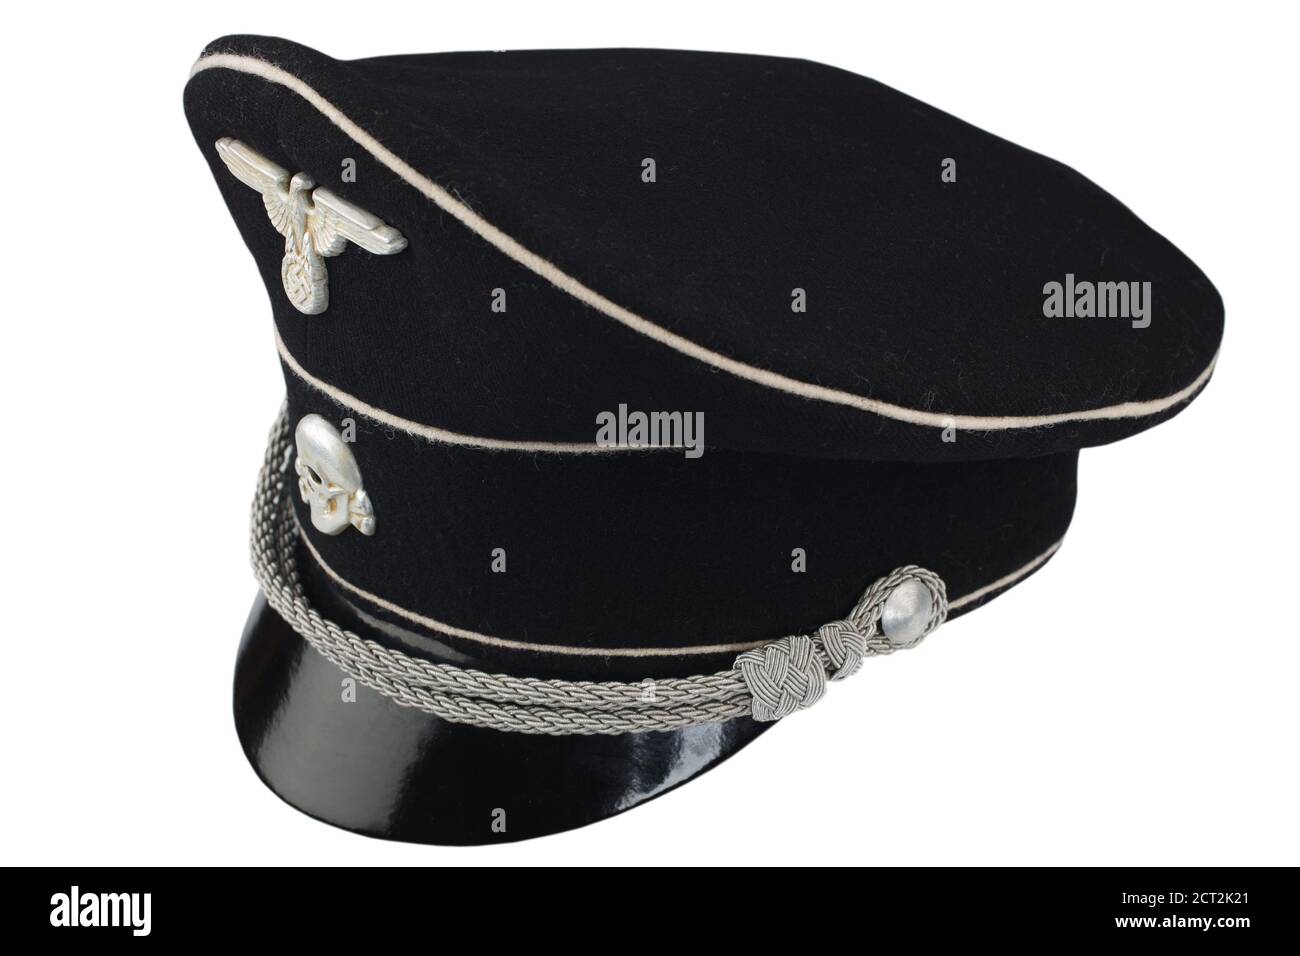 Nazi Uniform Skull High Resolution Stock Photography and Images - Alamy